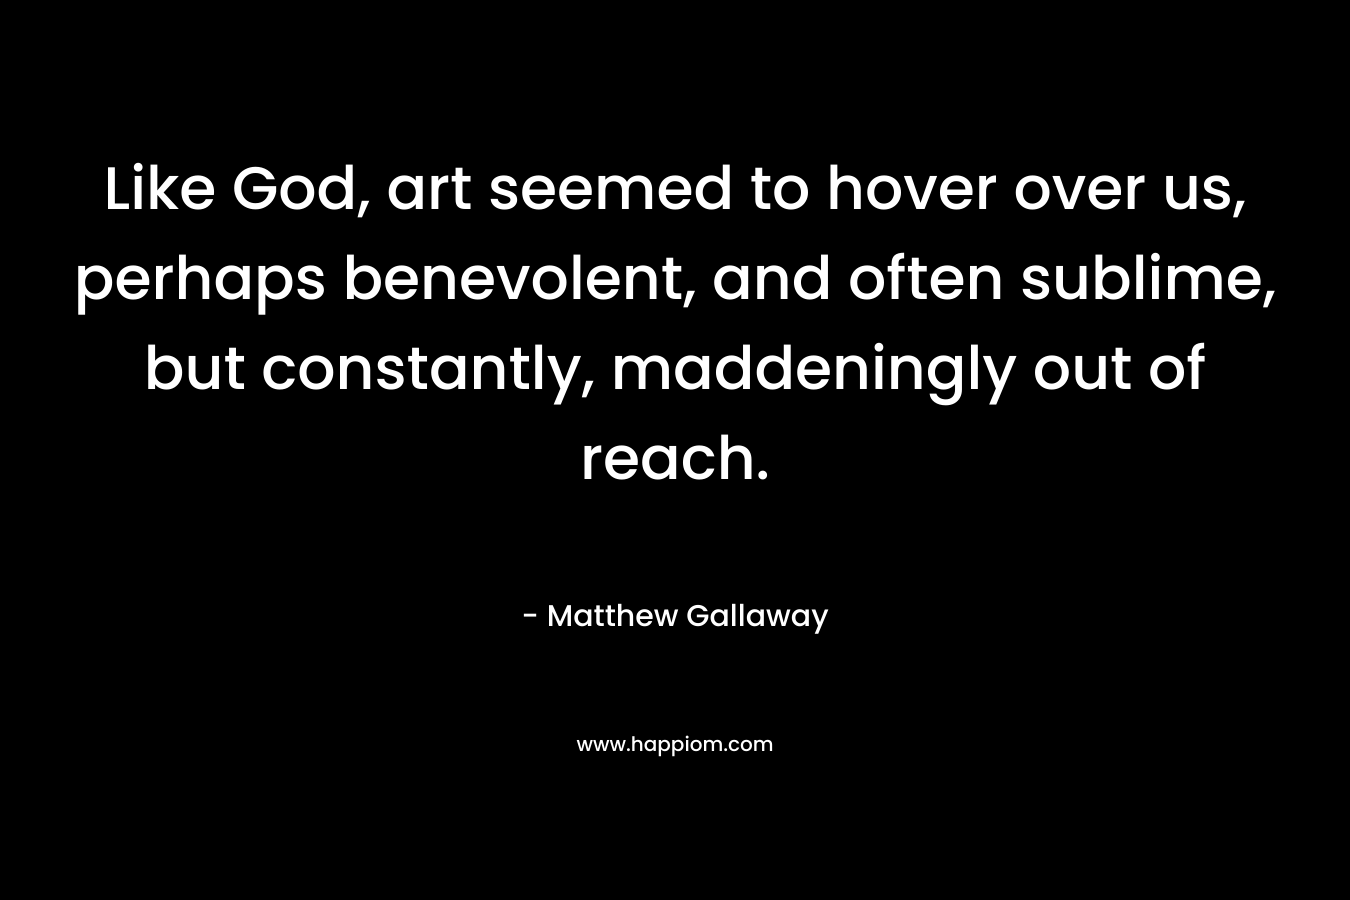 Like God, art seemed to hover over us, perhaps benevolent, and often sublime, but constantly, maddeningly out of reach. – Matthew Gallaway